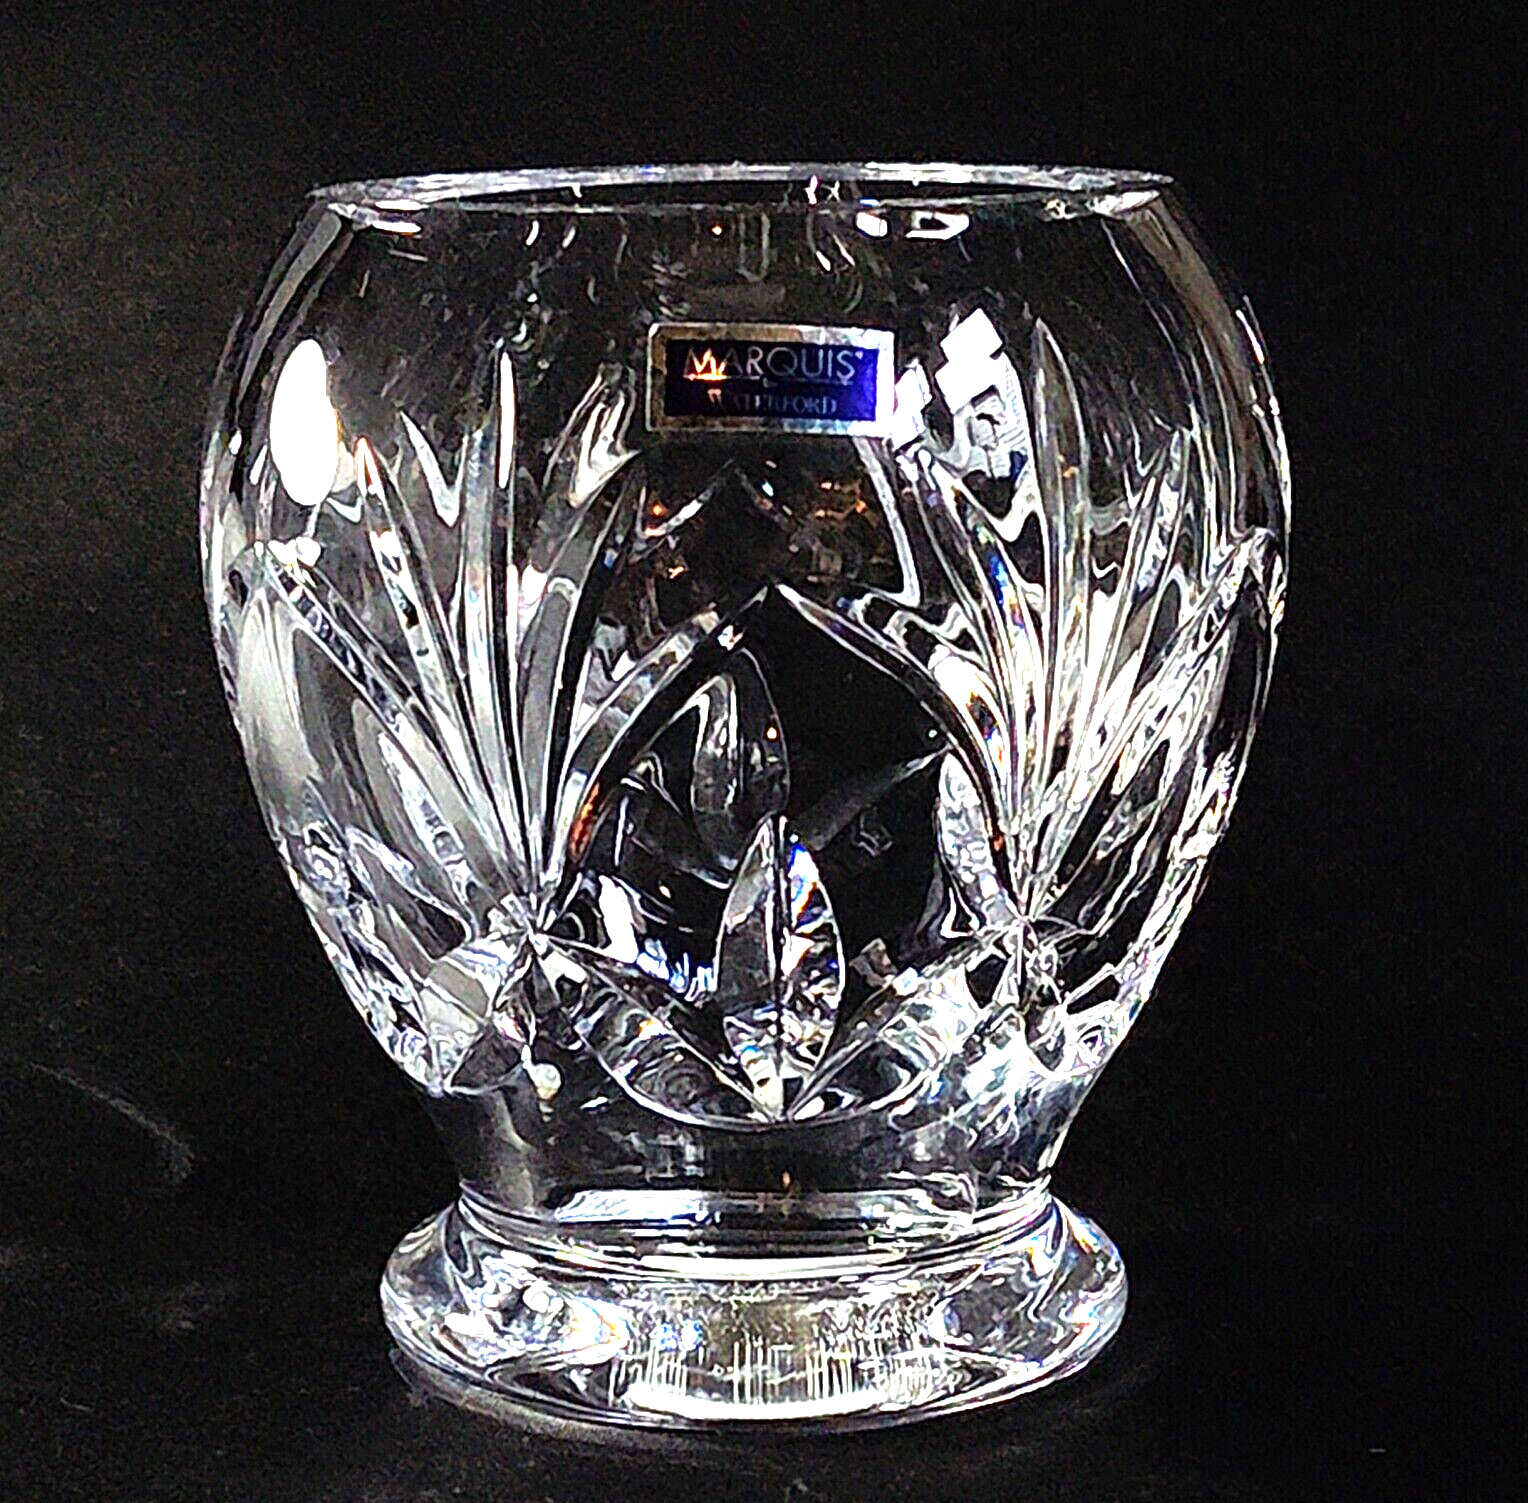 1 (One) WATERFORD Marquis CAPRICE Cut Crystal Footed Hurricane-Signed RETIRED